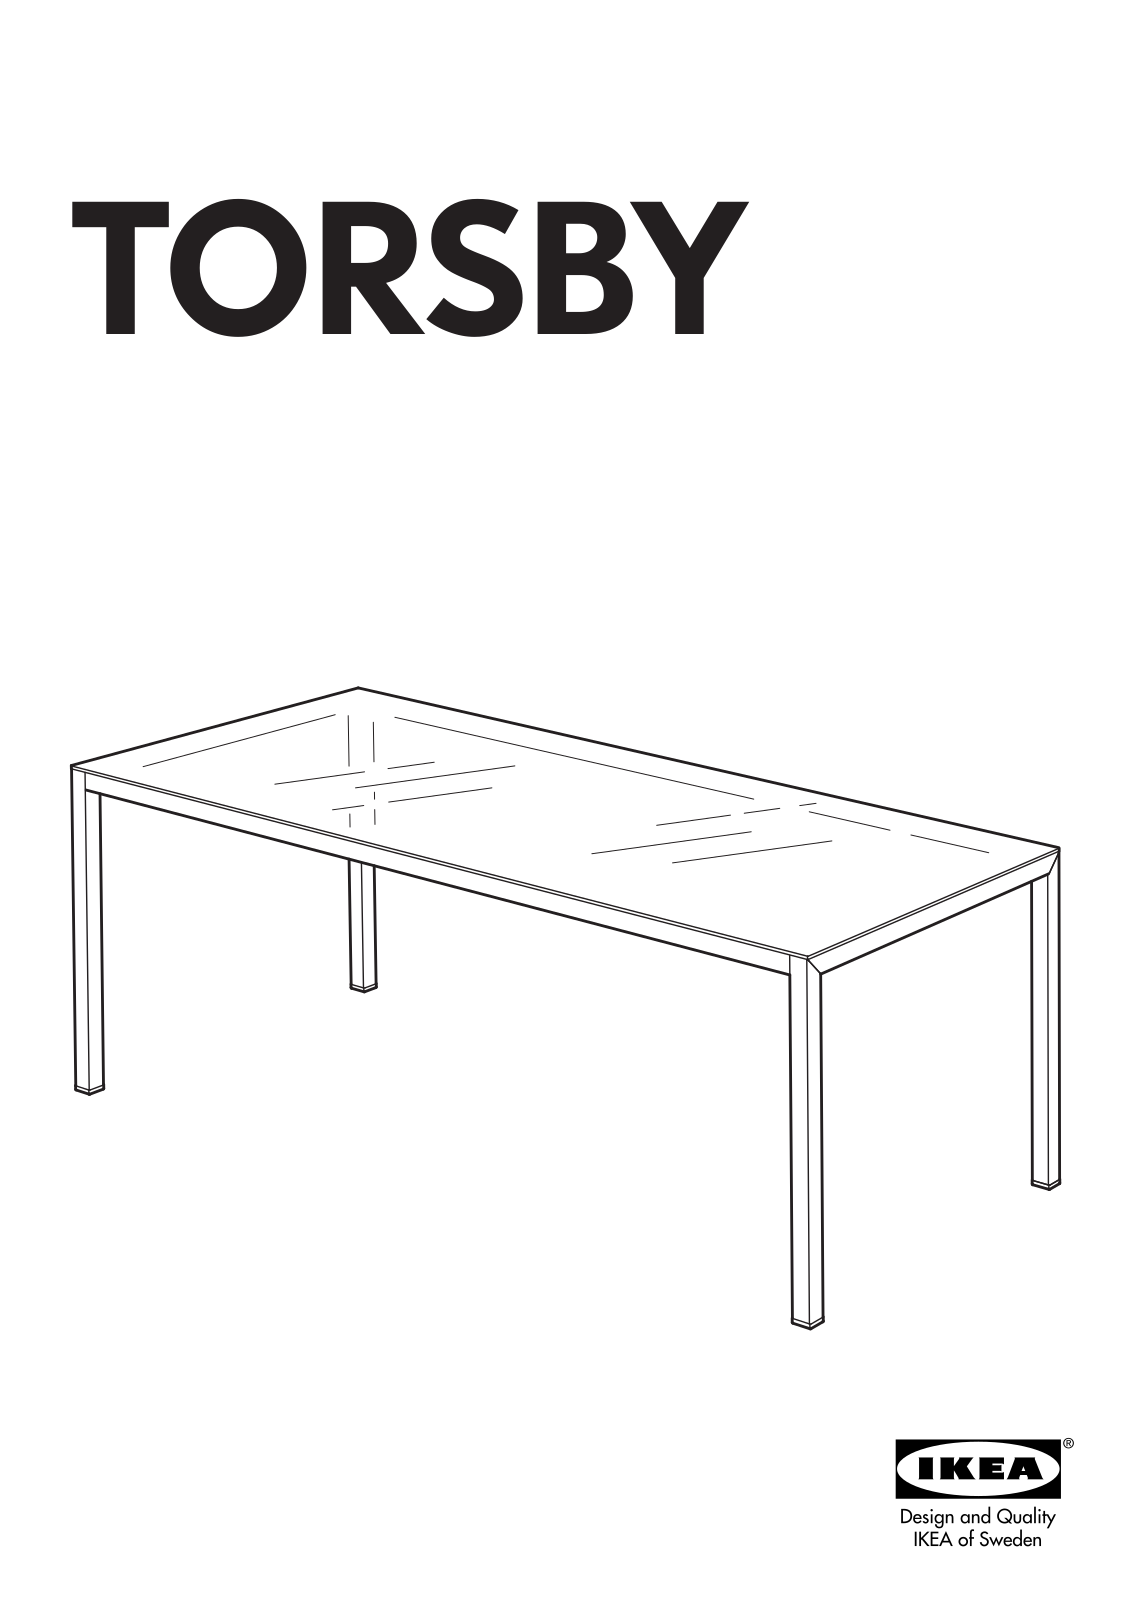 IKEA TORSBY DINING TABLE 71X34 Assembly Instruction